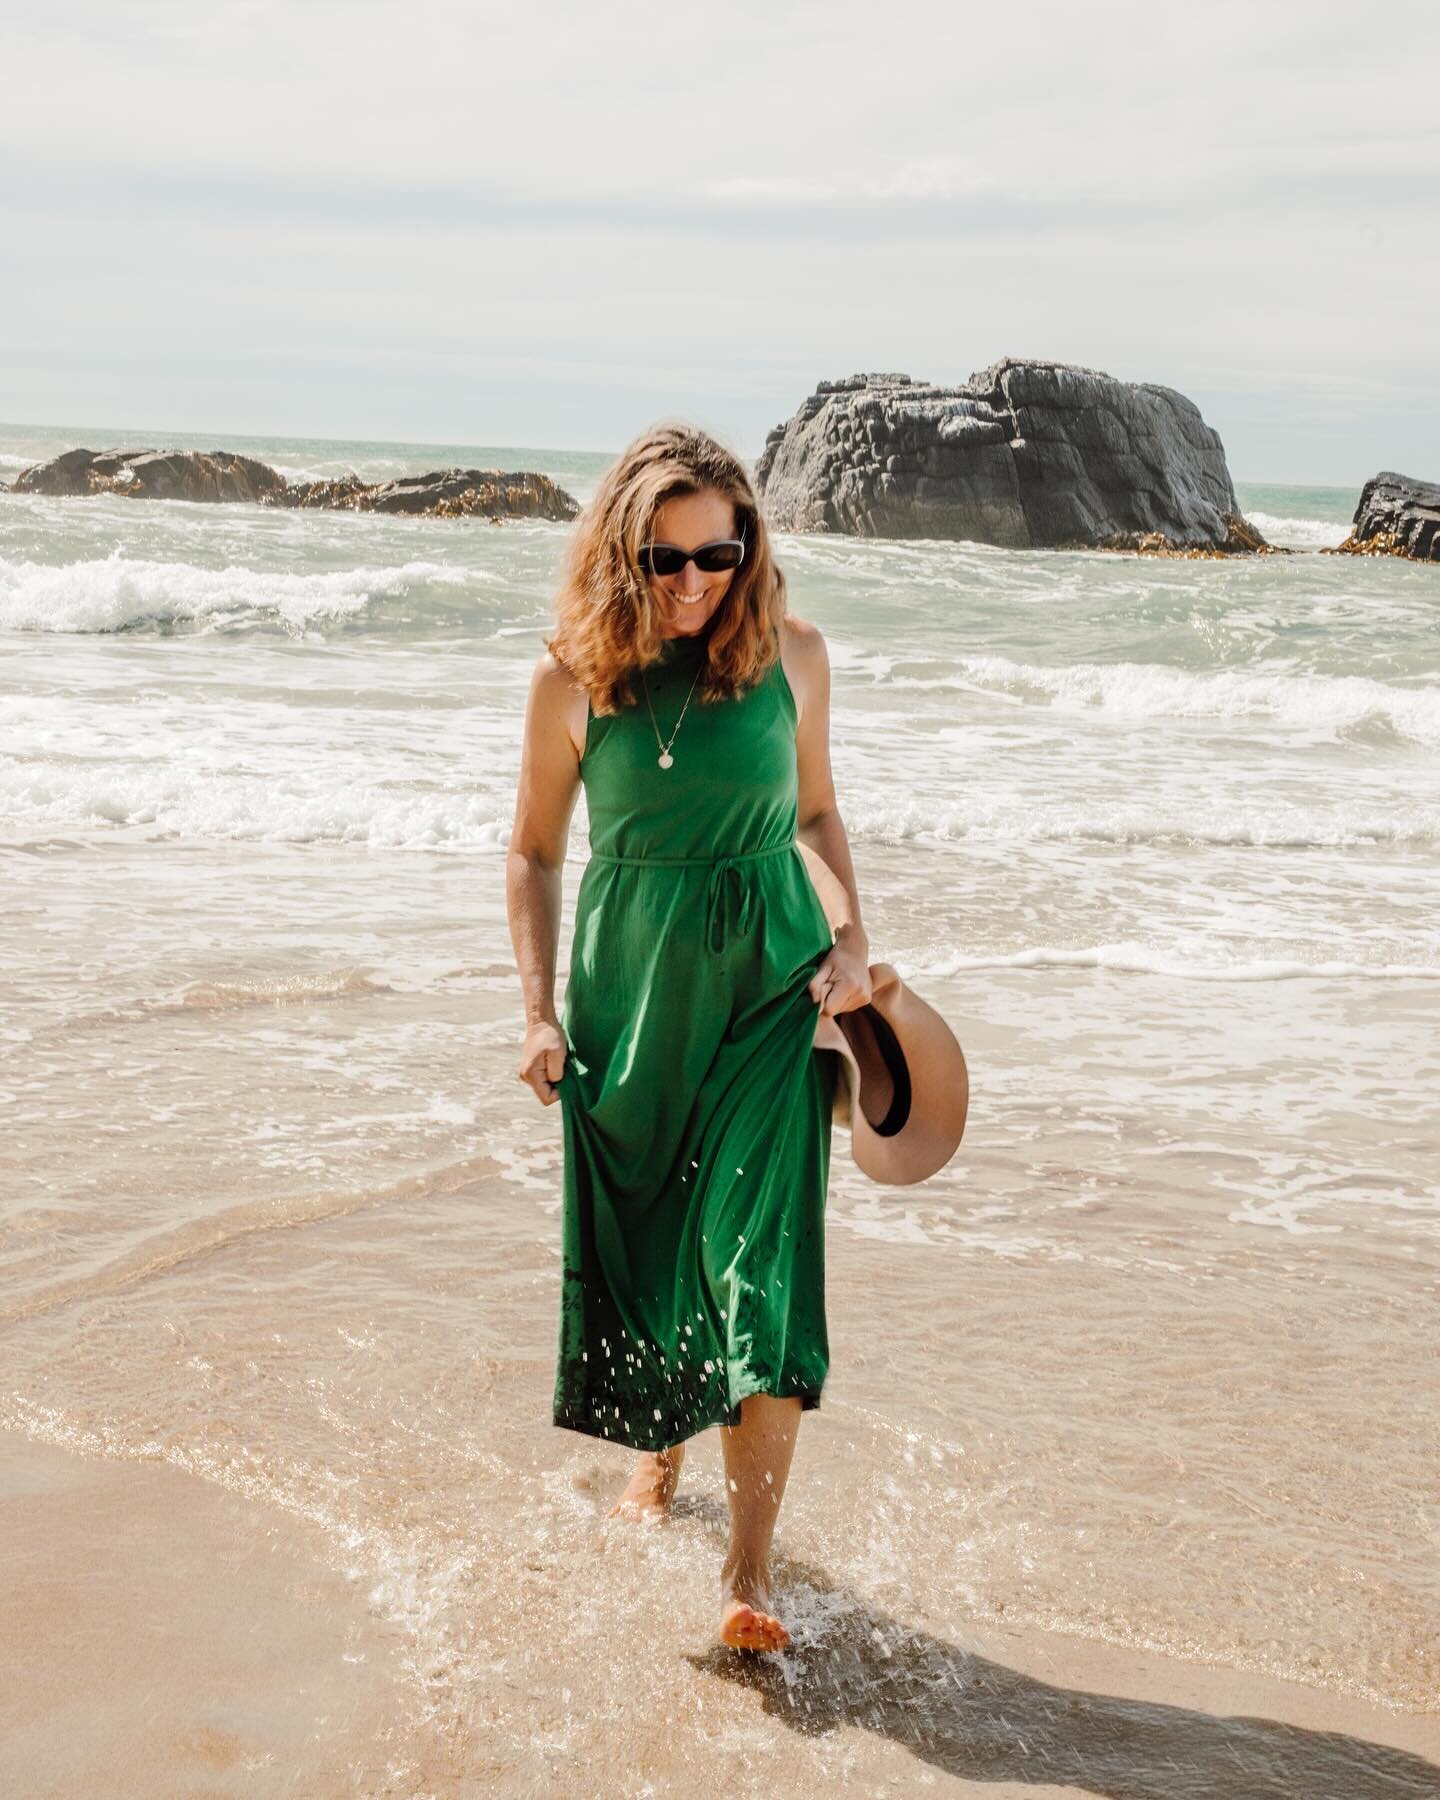 Beach walks feel so good ! The combination of sun on your skin; your barefoot feet sinking into the soft sand; the sound of the waves crashing onto the shore and the endless ebb and flow of the tide&hellip;

Bring on summer - we are ready and waiting